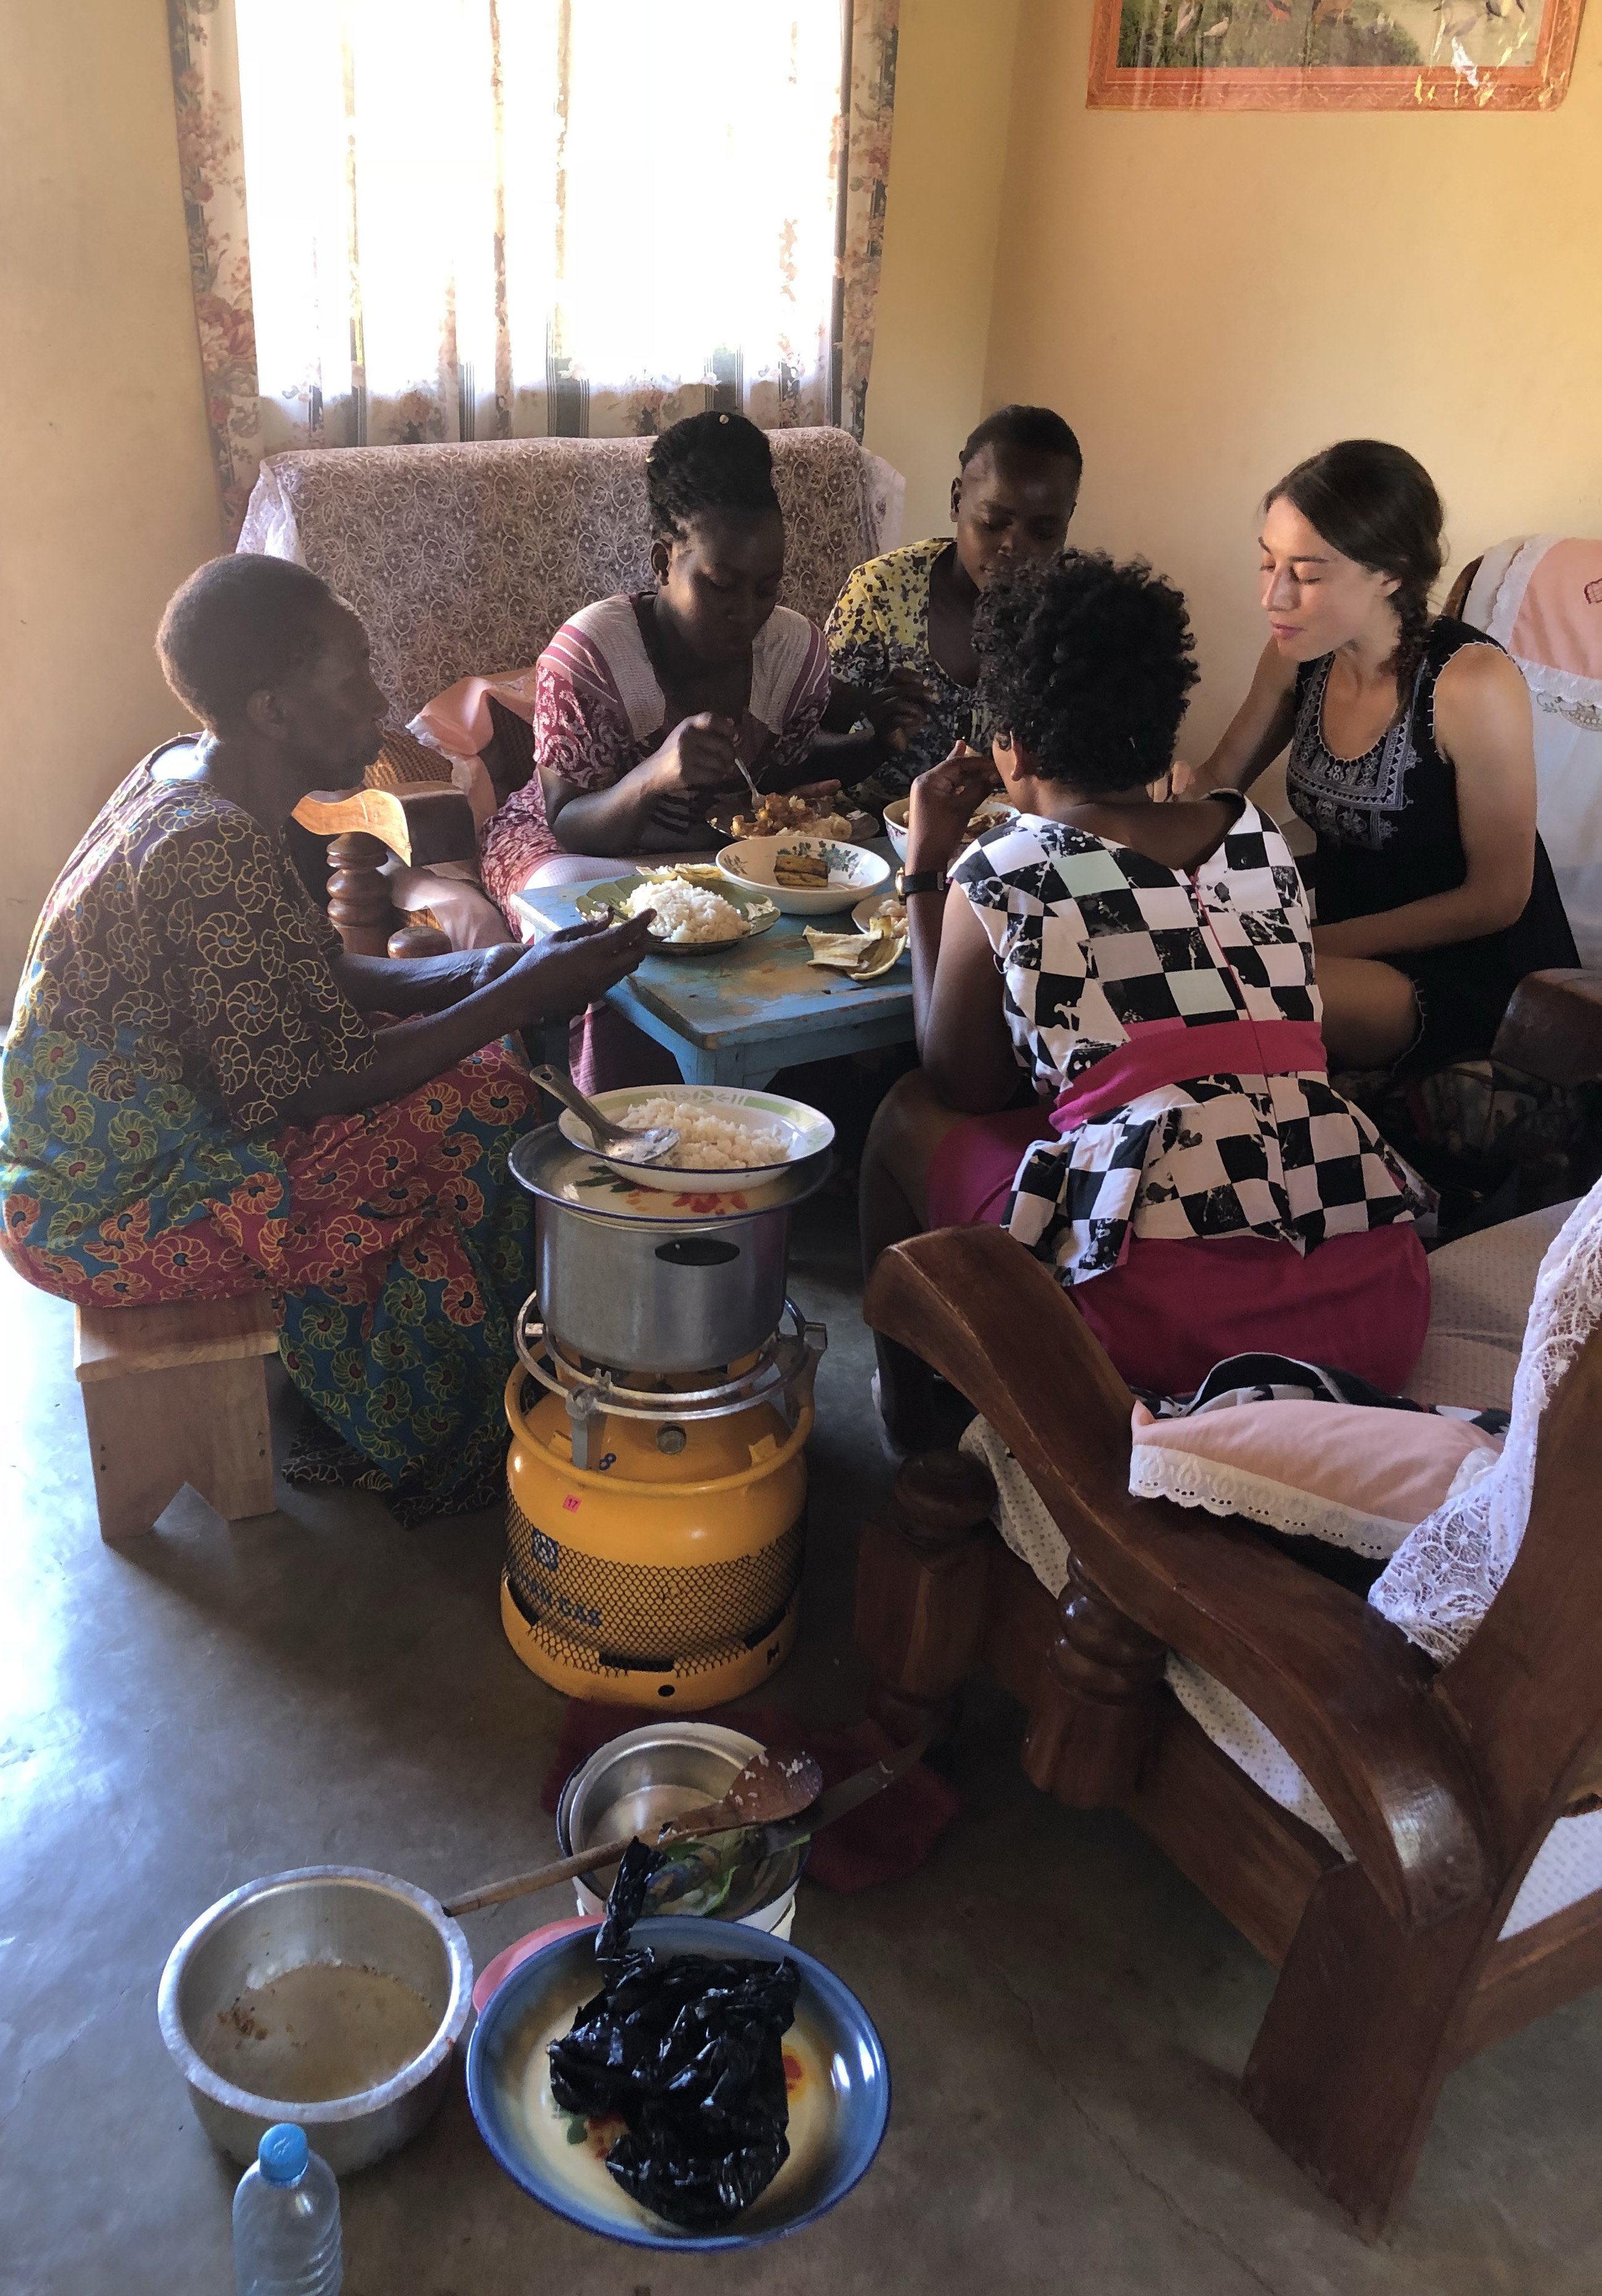 4 African women and a white woman eating around a table with a cookstove in foreground